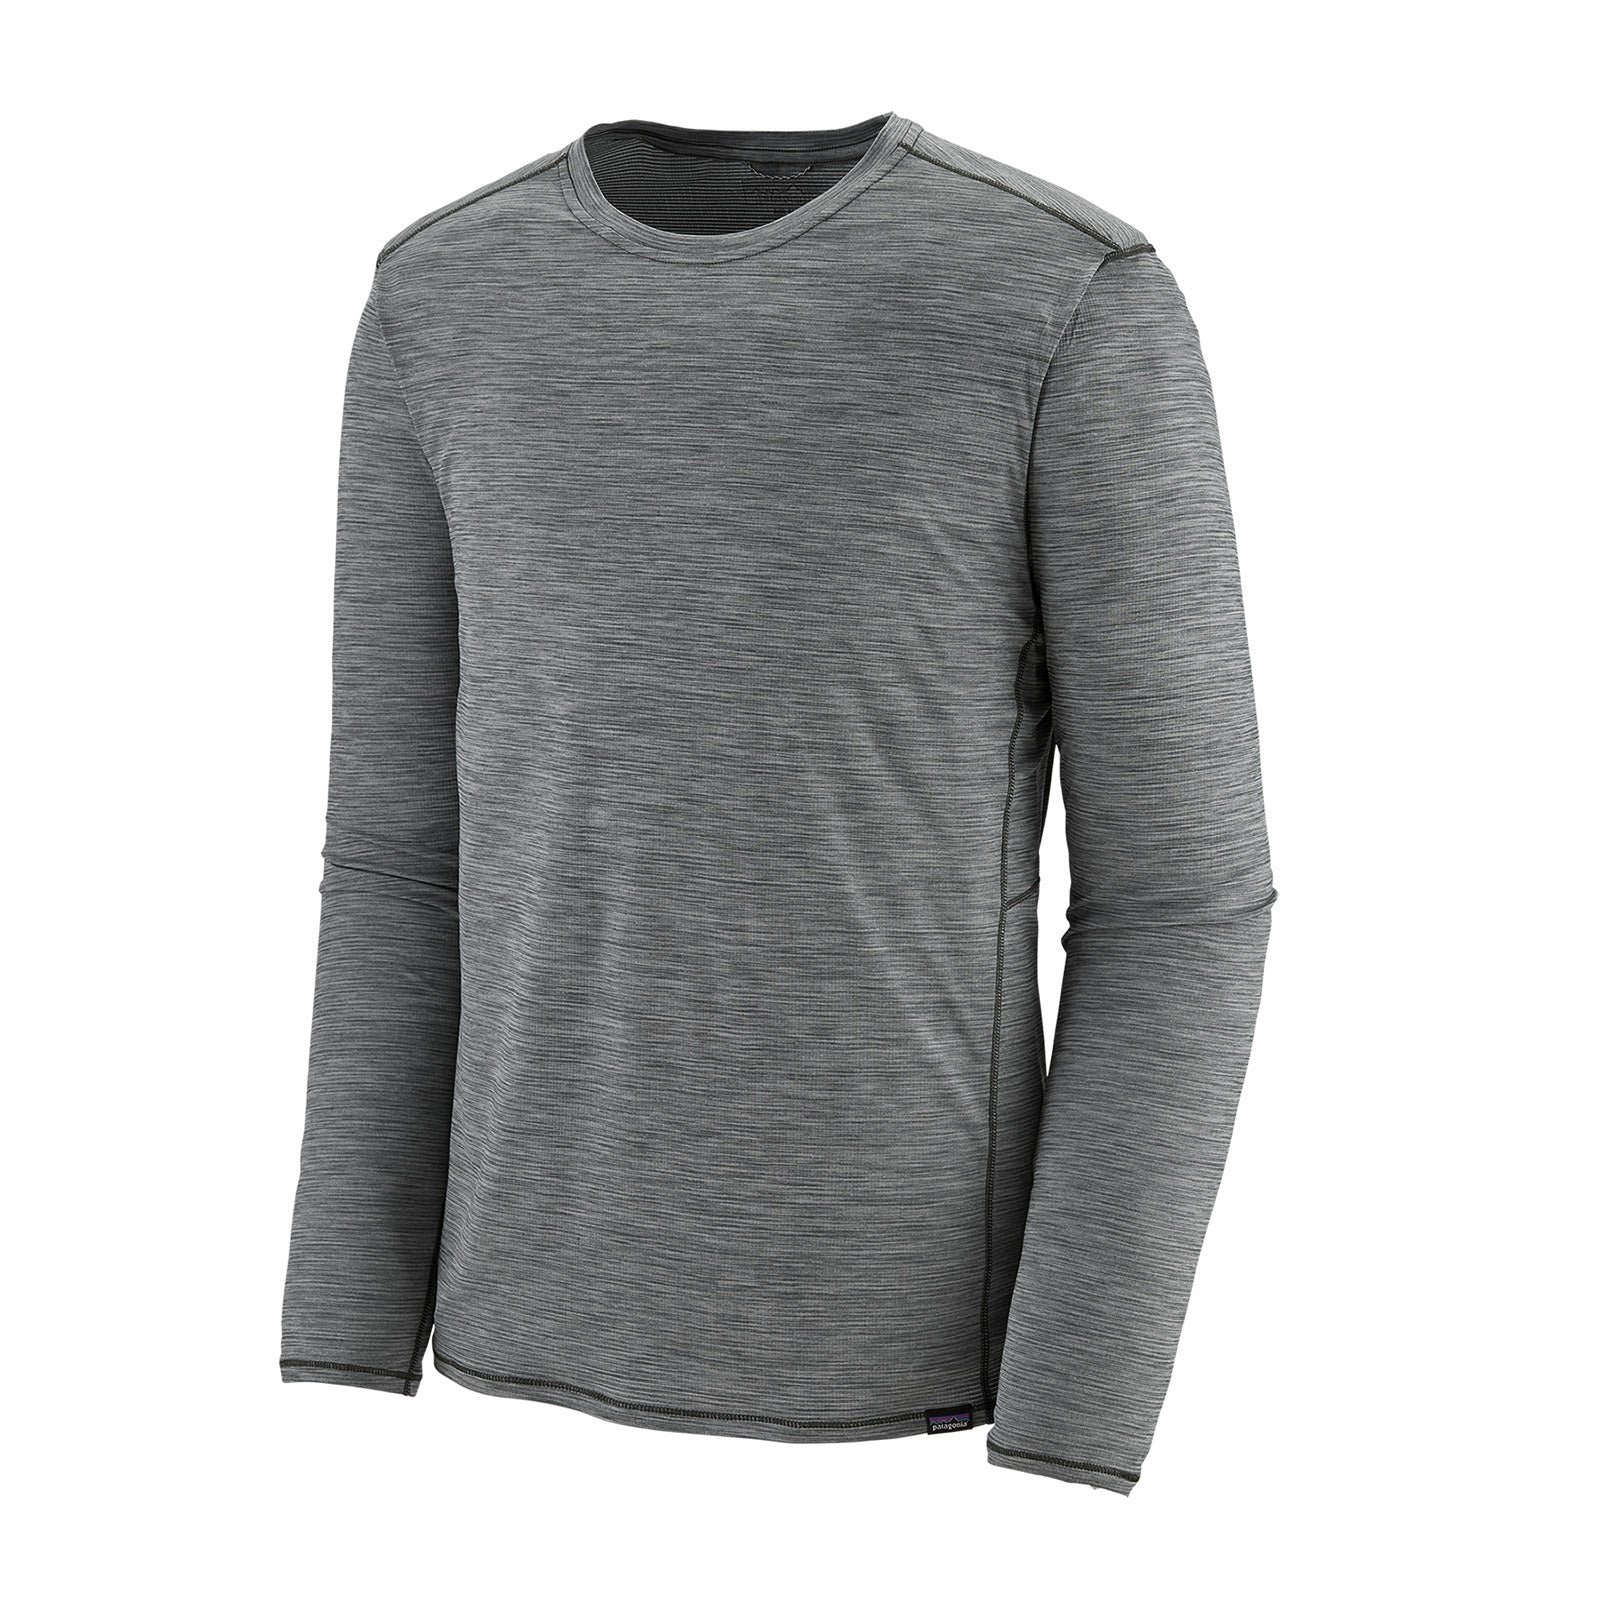 patagonia mens long sleeve capilene cool lightweight shirt in forge grey, front view